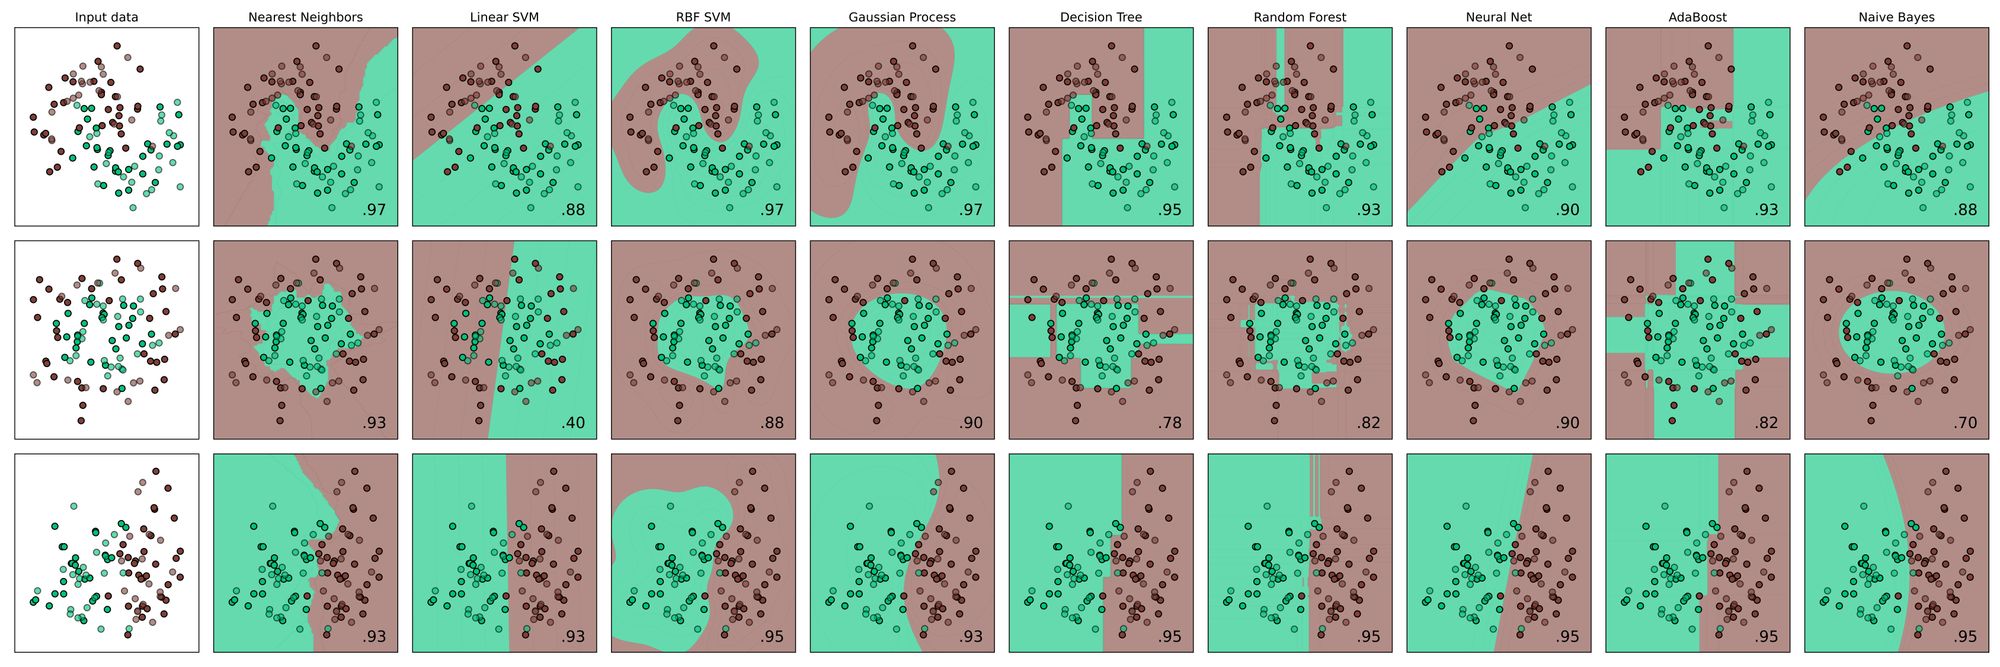 Inductive Clustering For Lower Dimension Input Vectors